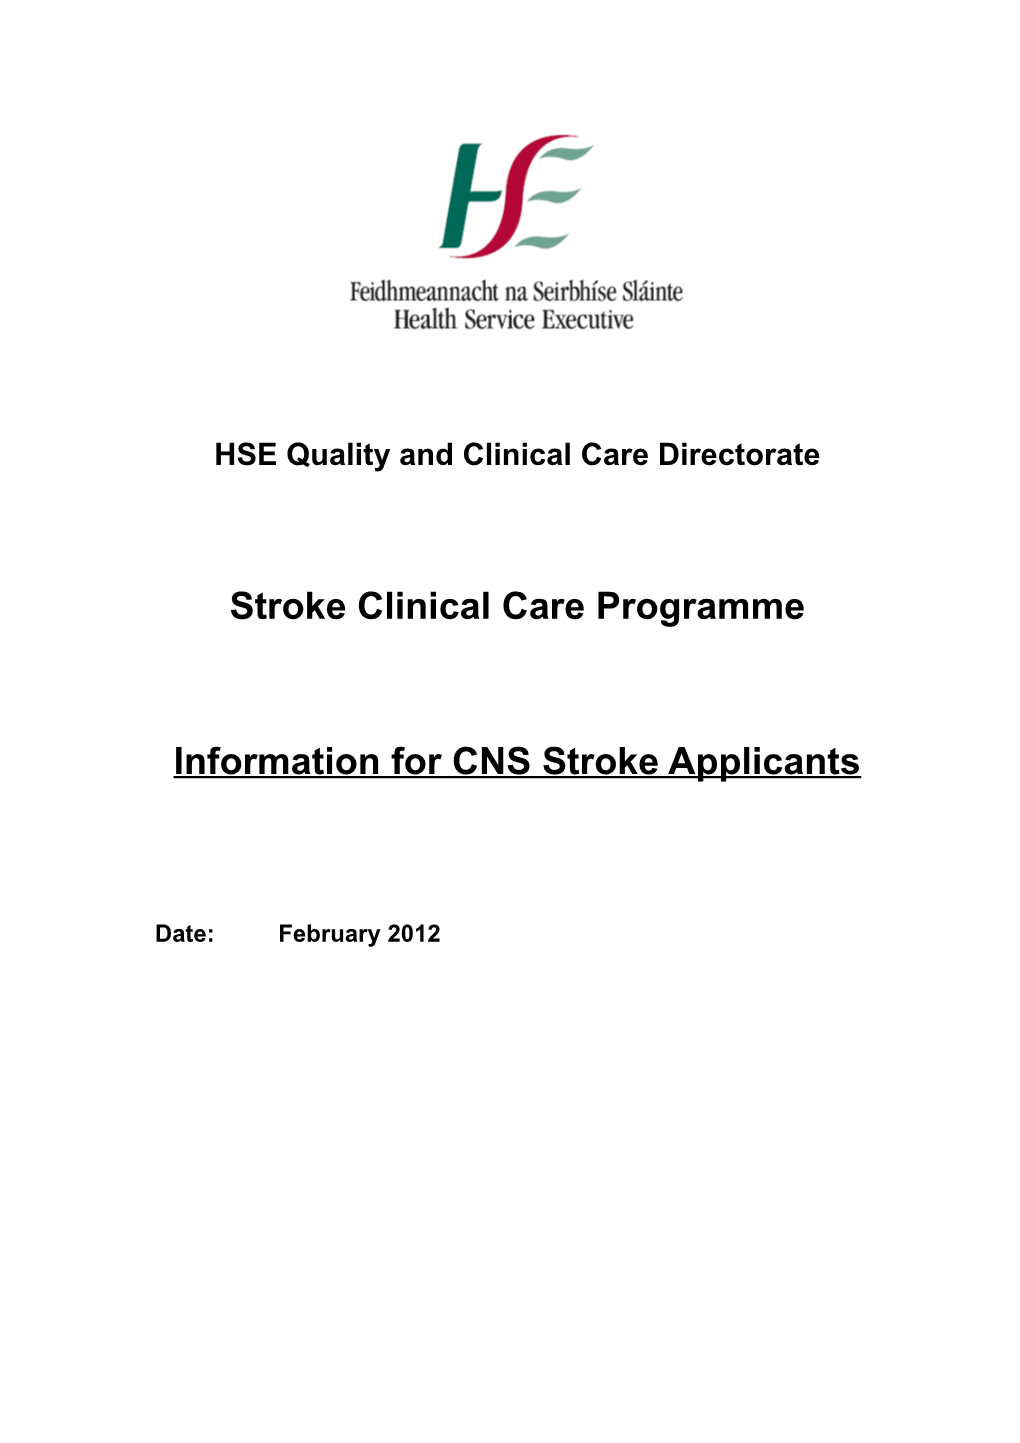 HSE Quality and Clinical Care Directorate